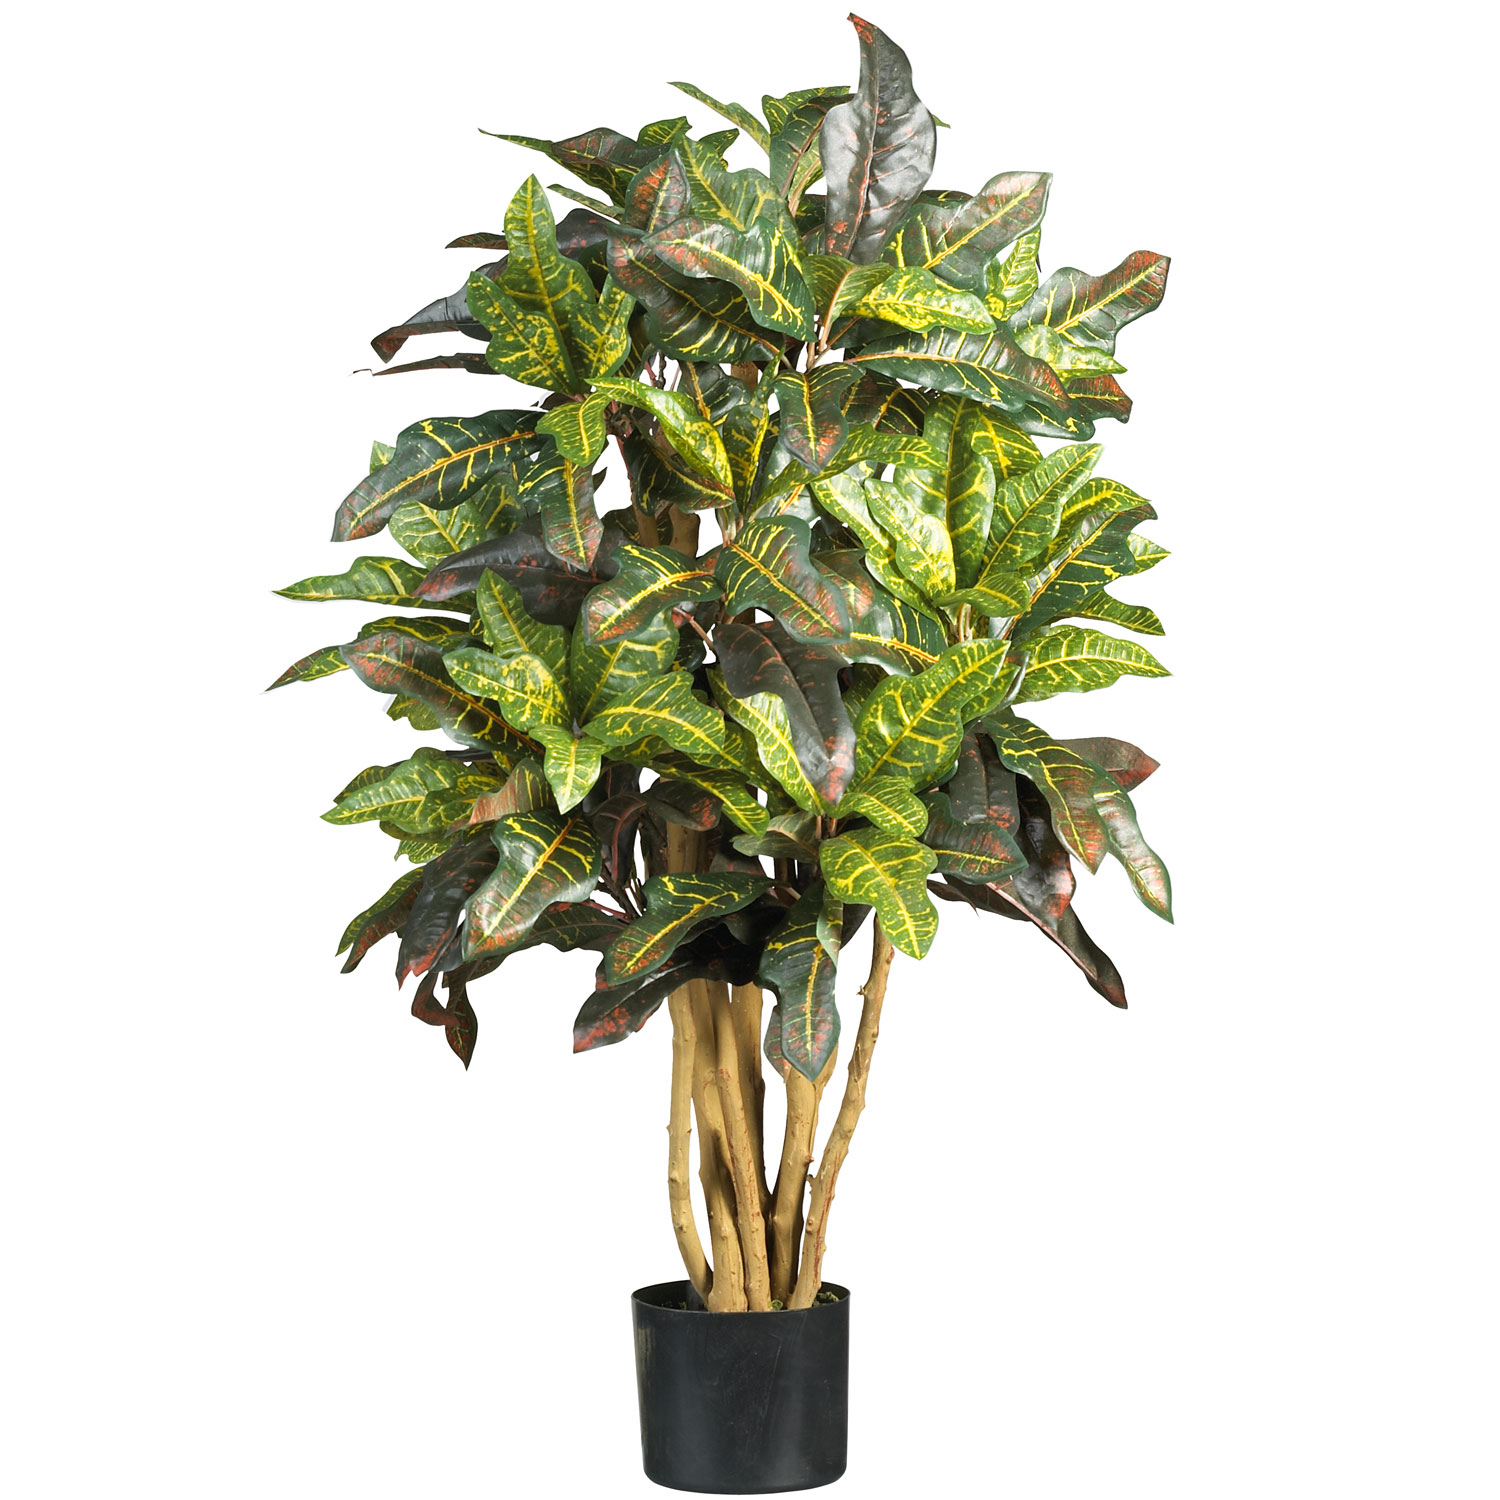 3 Foot Croton Tree: Potted